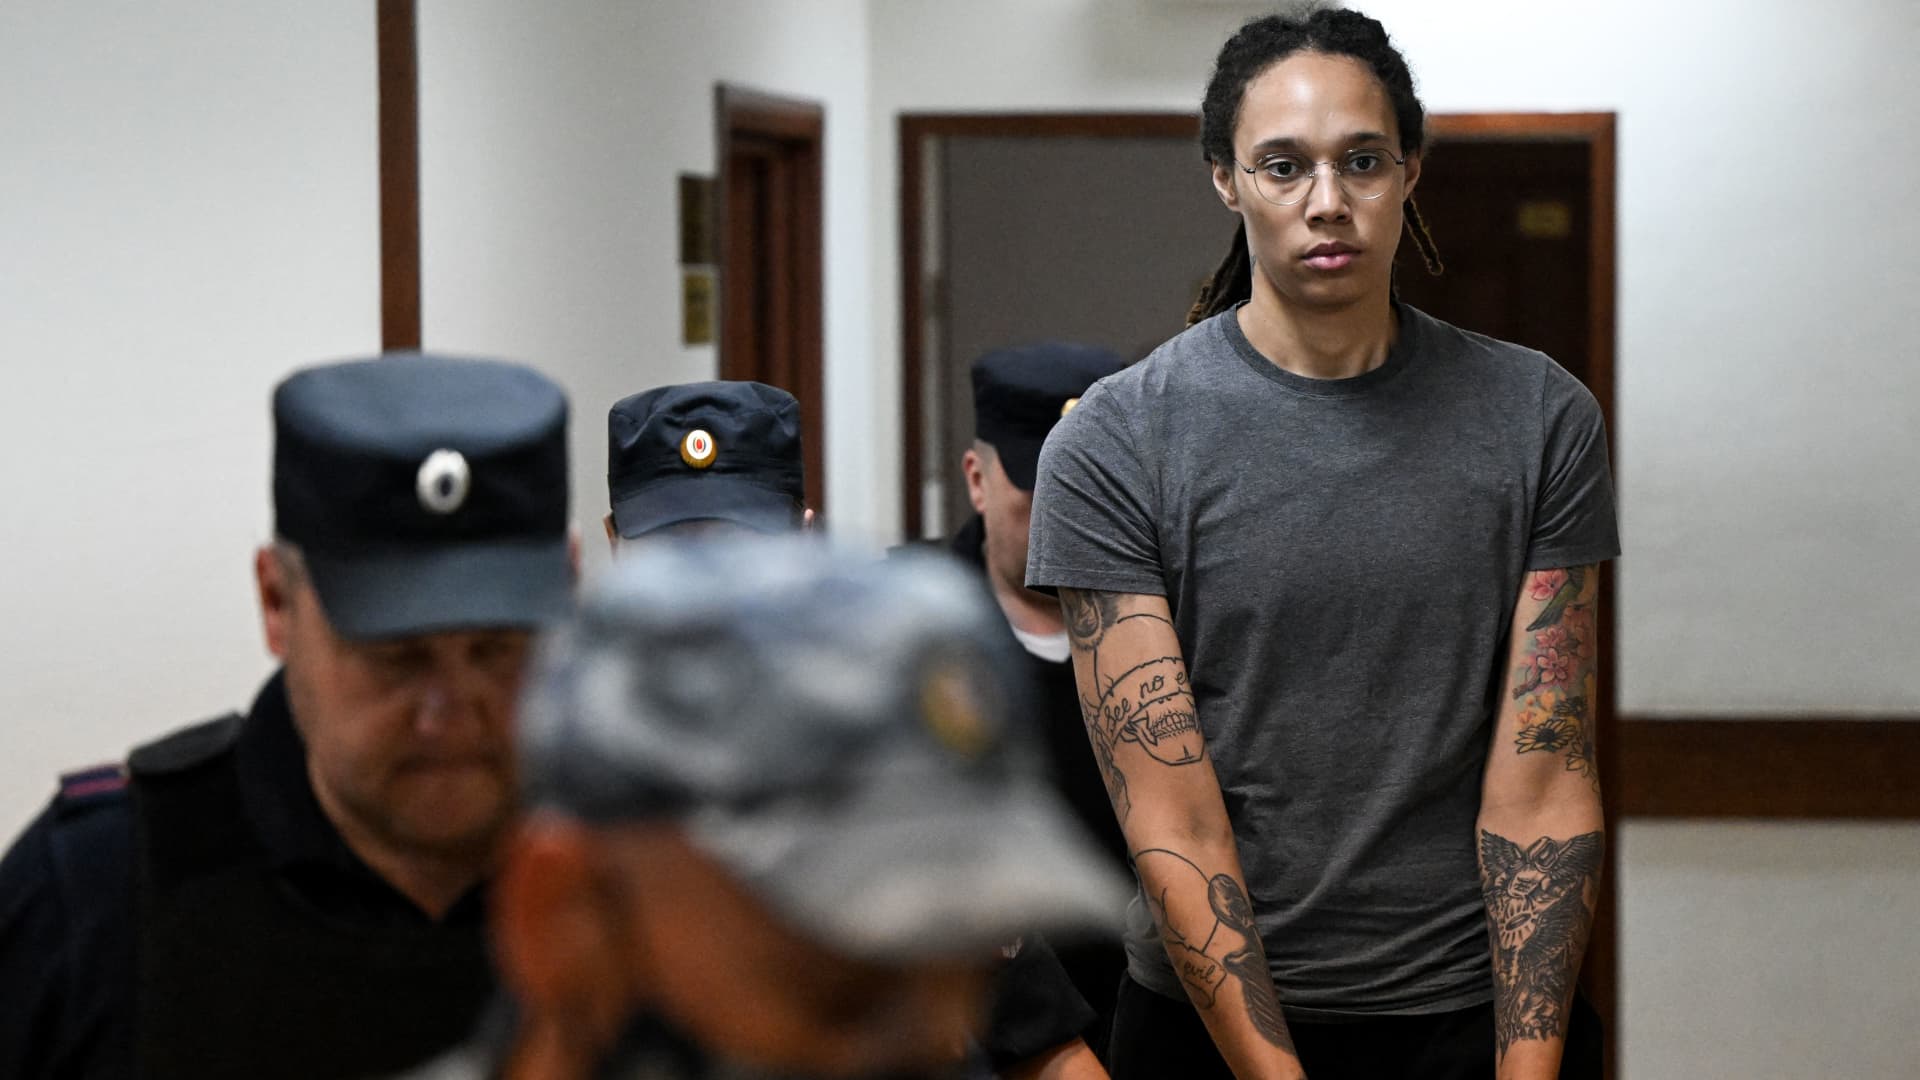 US' Women's National Basketball Association (NBA) basketball player Brittney Griner, who was detained at Moscow's Sheremetyevo airport and later charged with illegal possession of cannabis, stands inside a defendants' cage before a court hearing in Khimki outside Moscow, on August 4, 2022. -